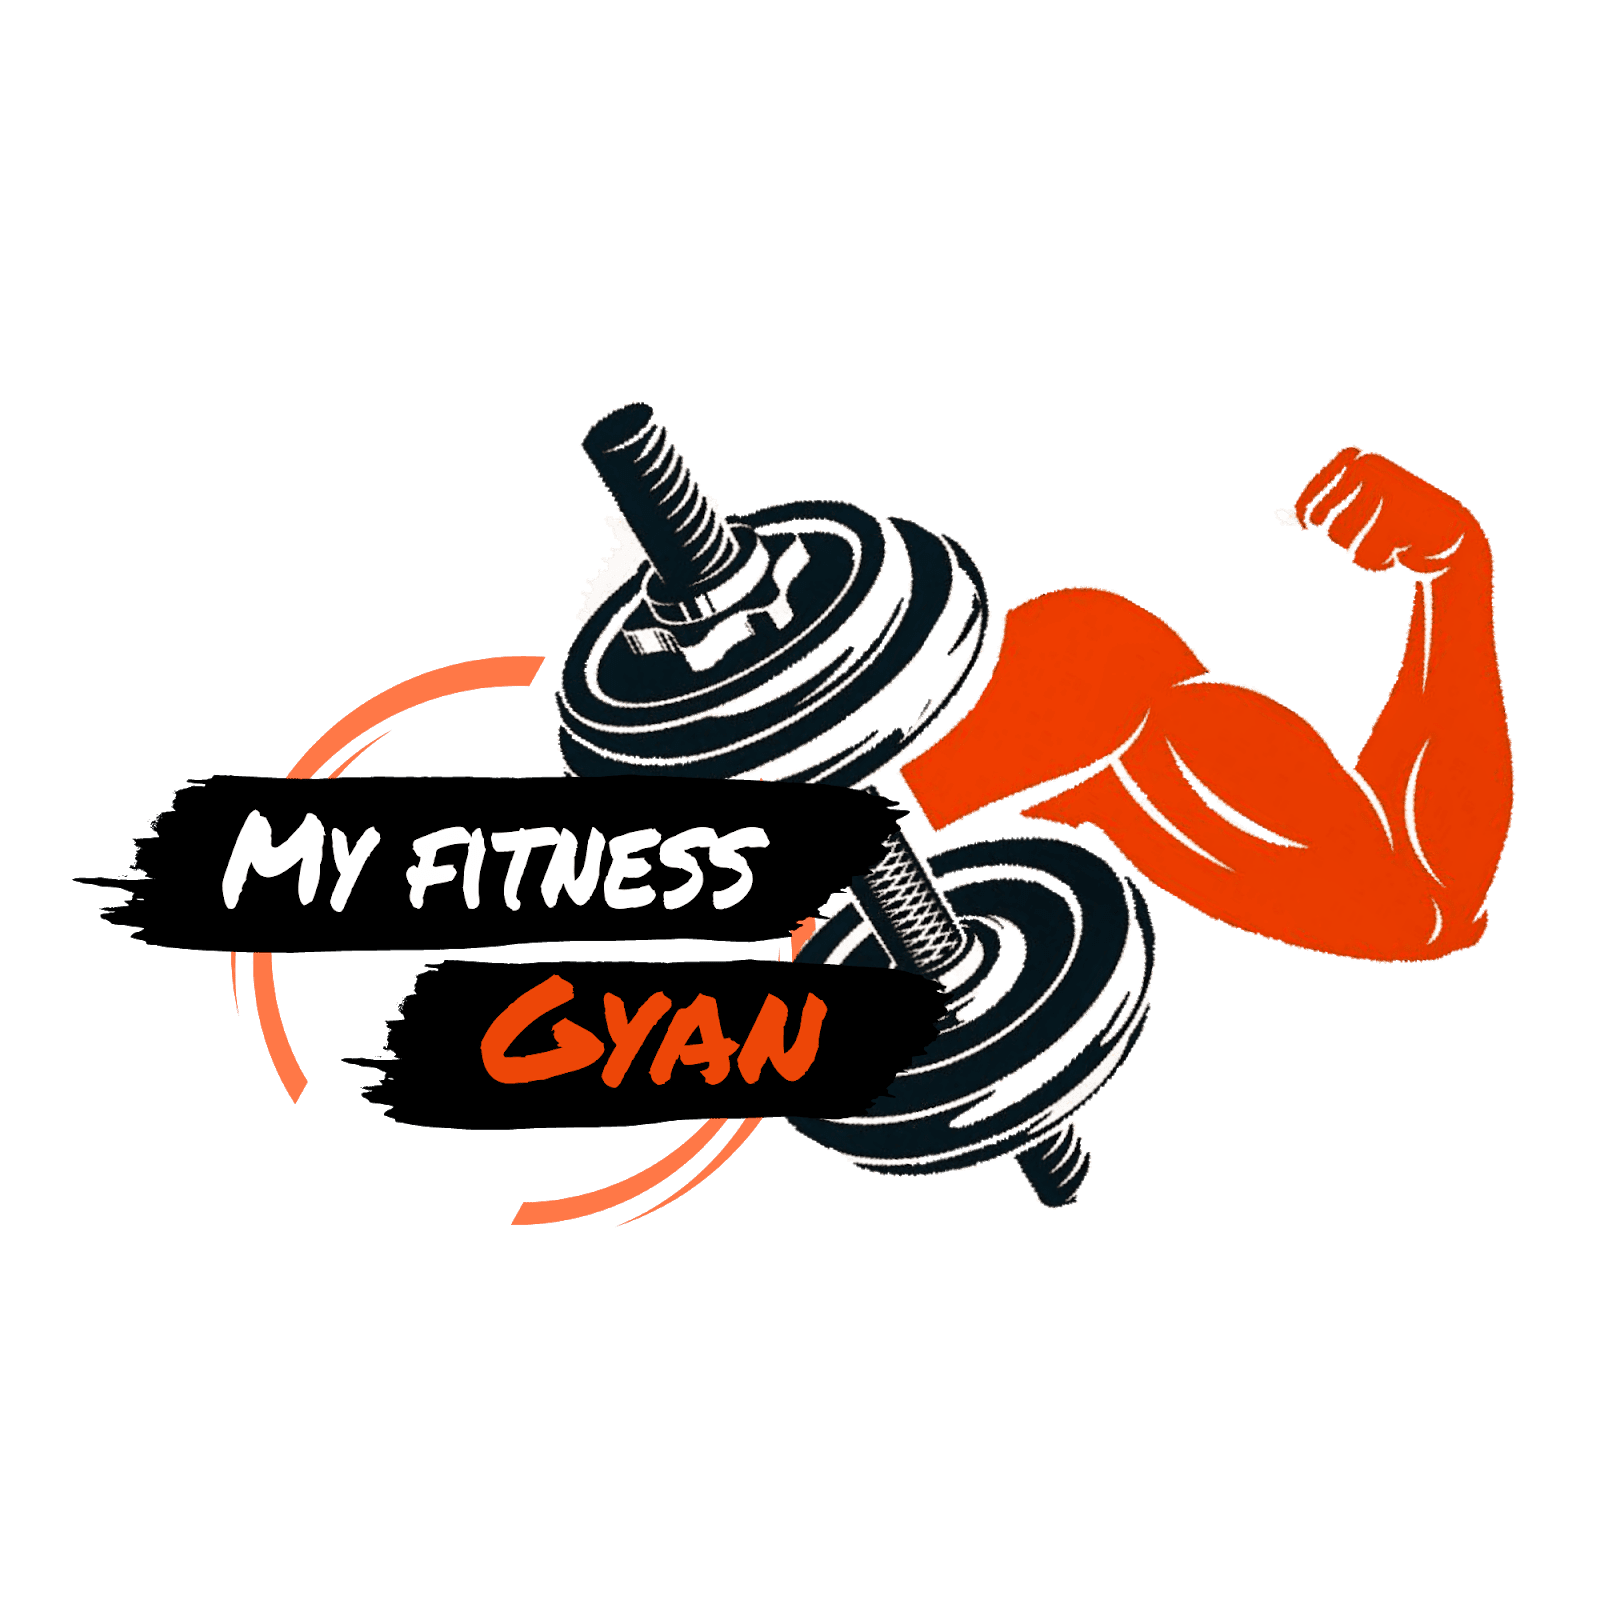 MY FITNESS GYAAN